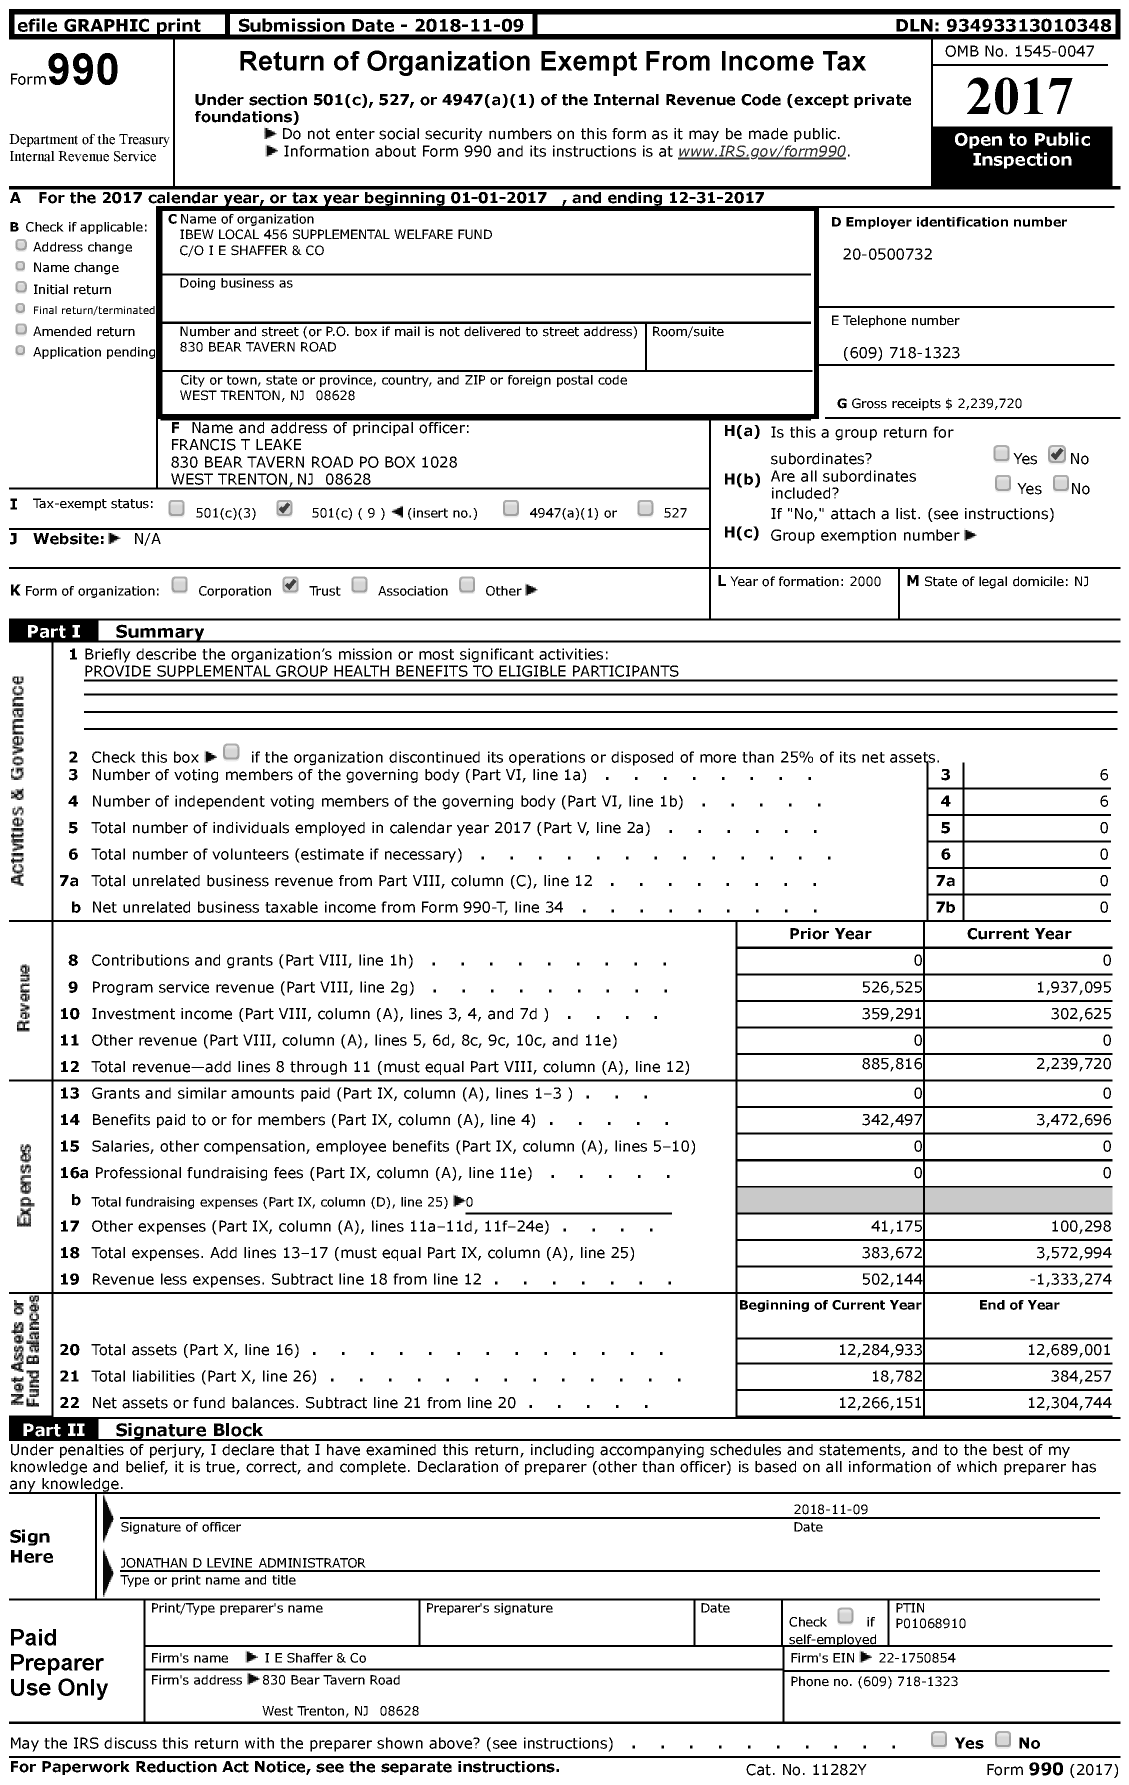 Image of first page of 2017 Form 990 for IBEW Local 456 Supplemental Welfare Fund